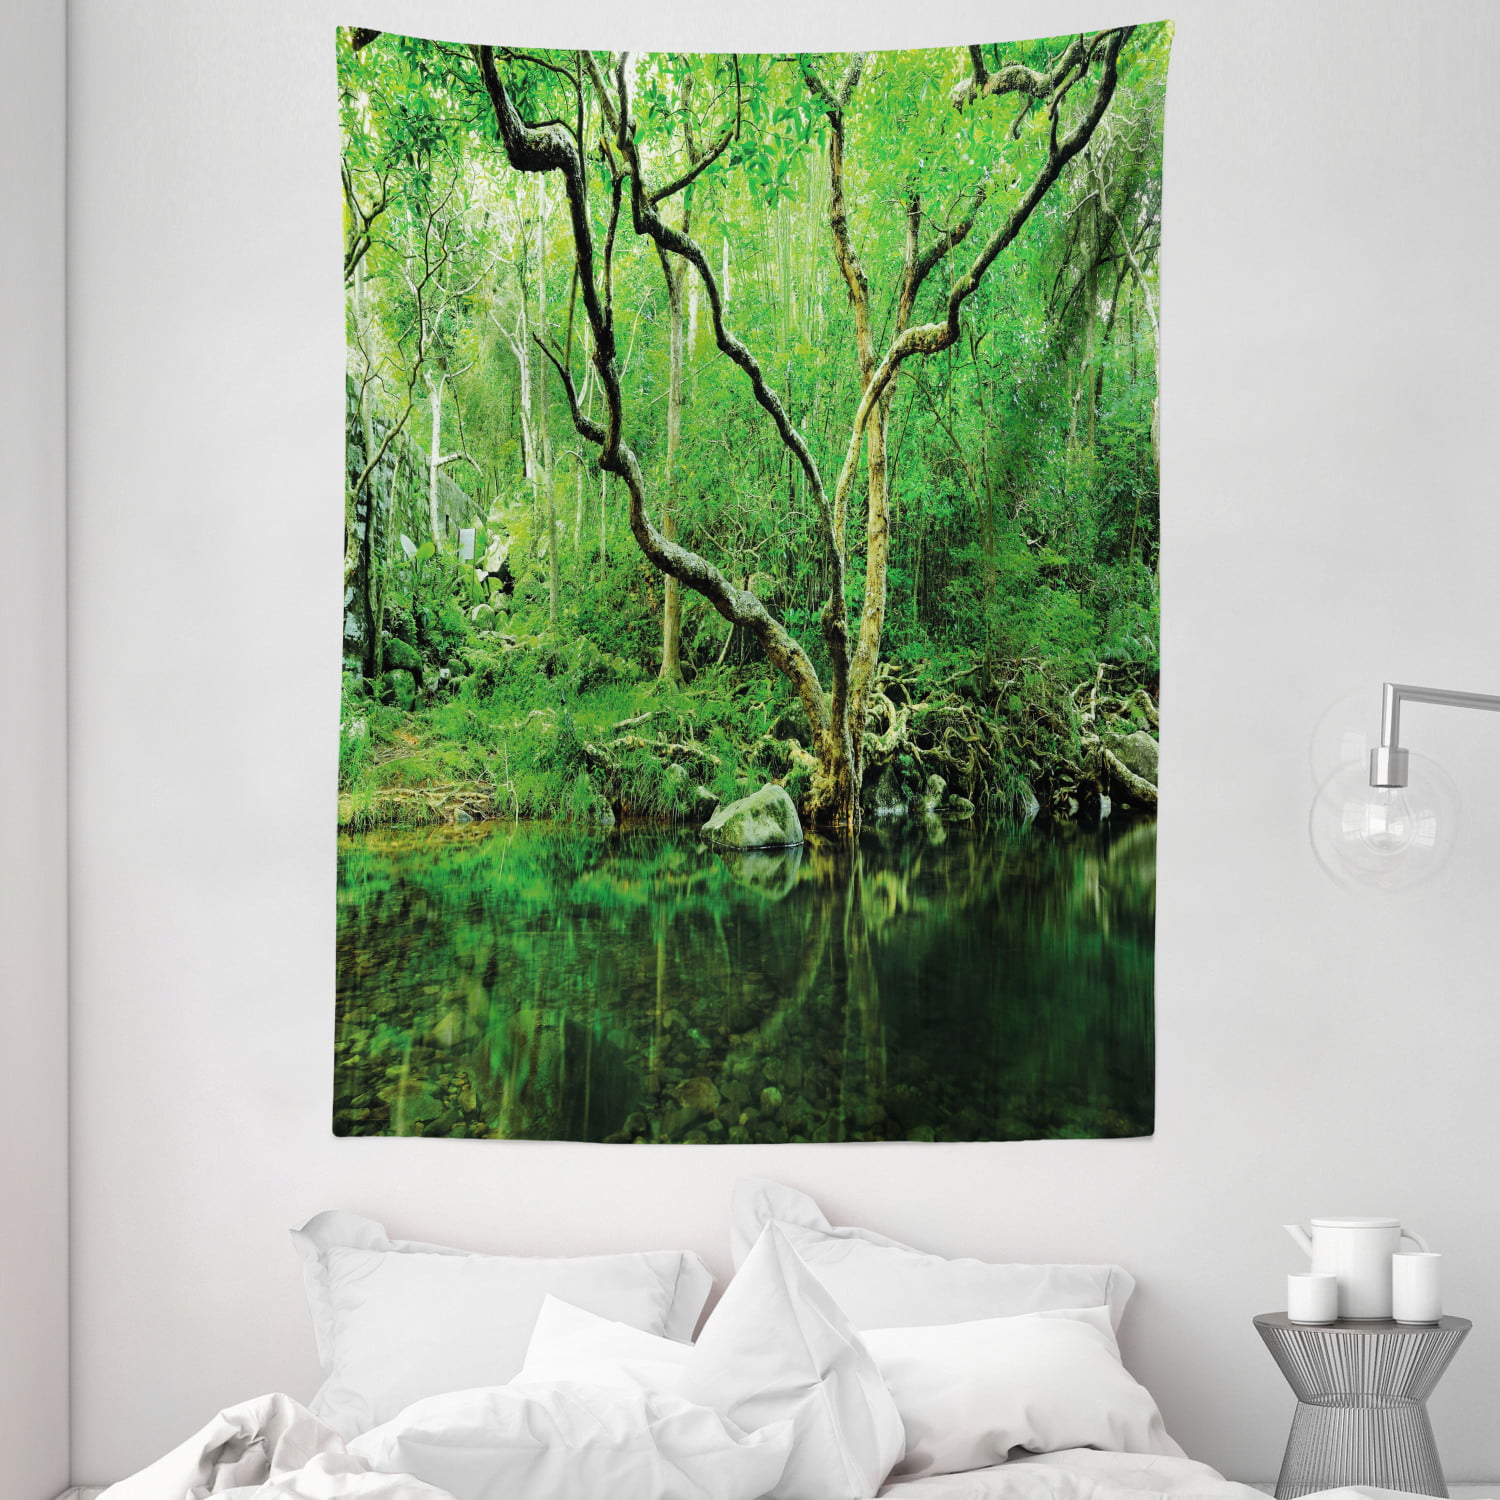 Wall Tapestry Bedroom Decor Polyester Forest 3D Digital Printing Hanging Cloth 